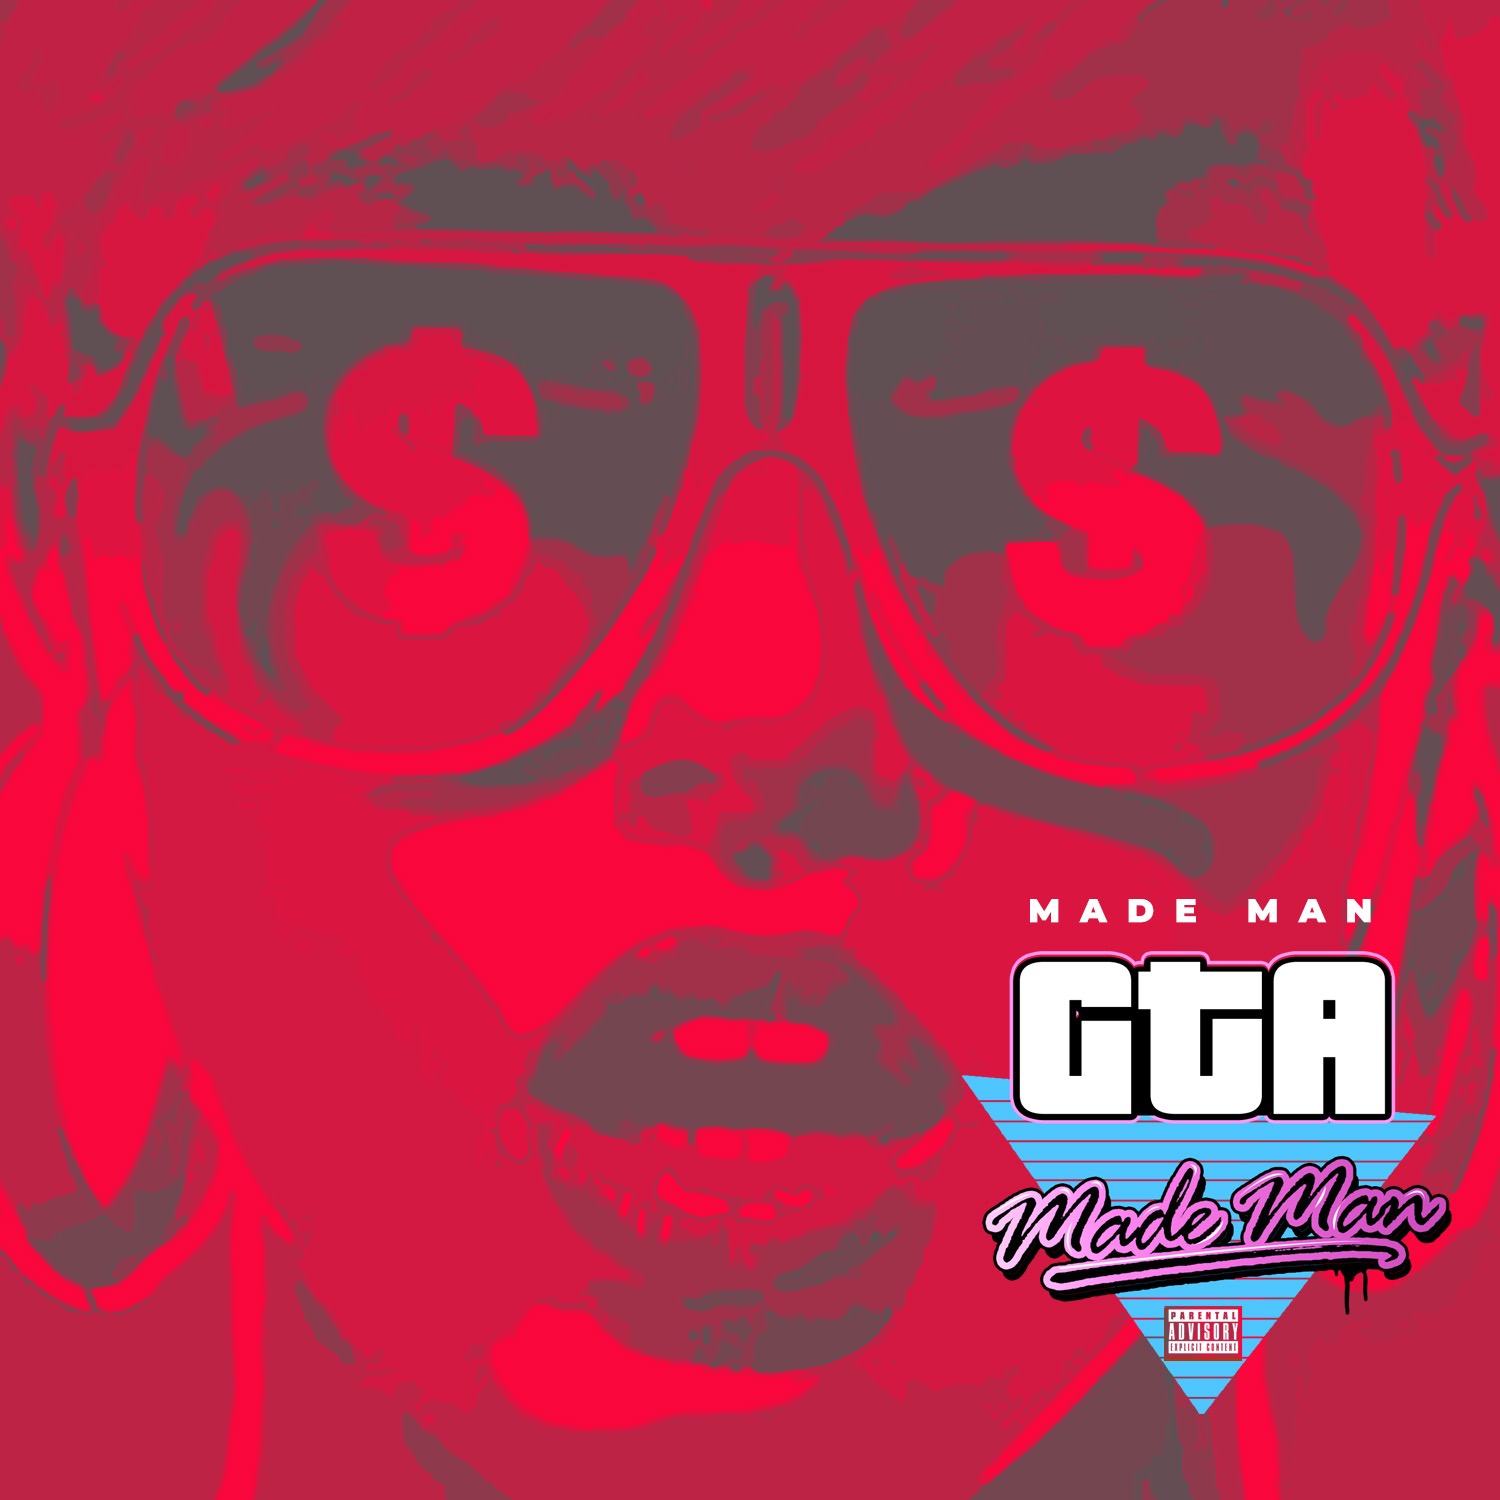 Made Man Drops Sexy Valentine’s Day Single For Side Chicks “G.T.A”